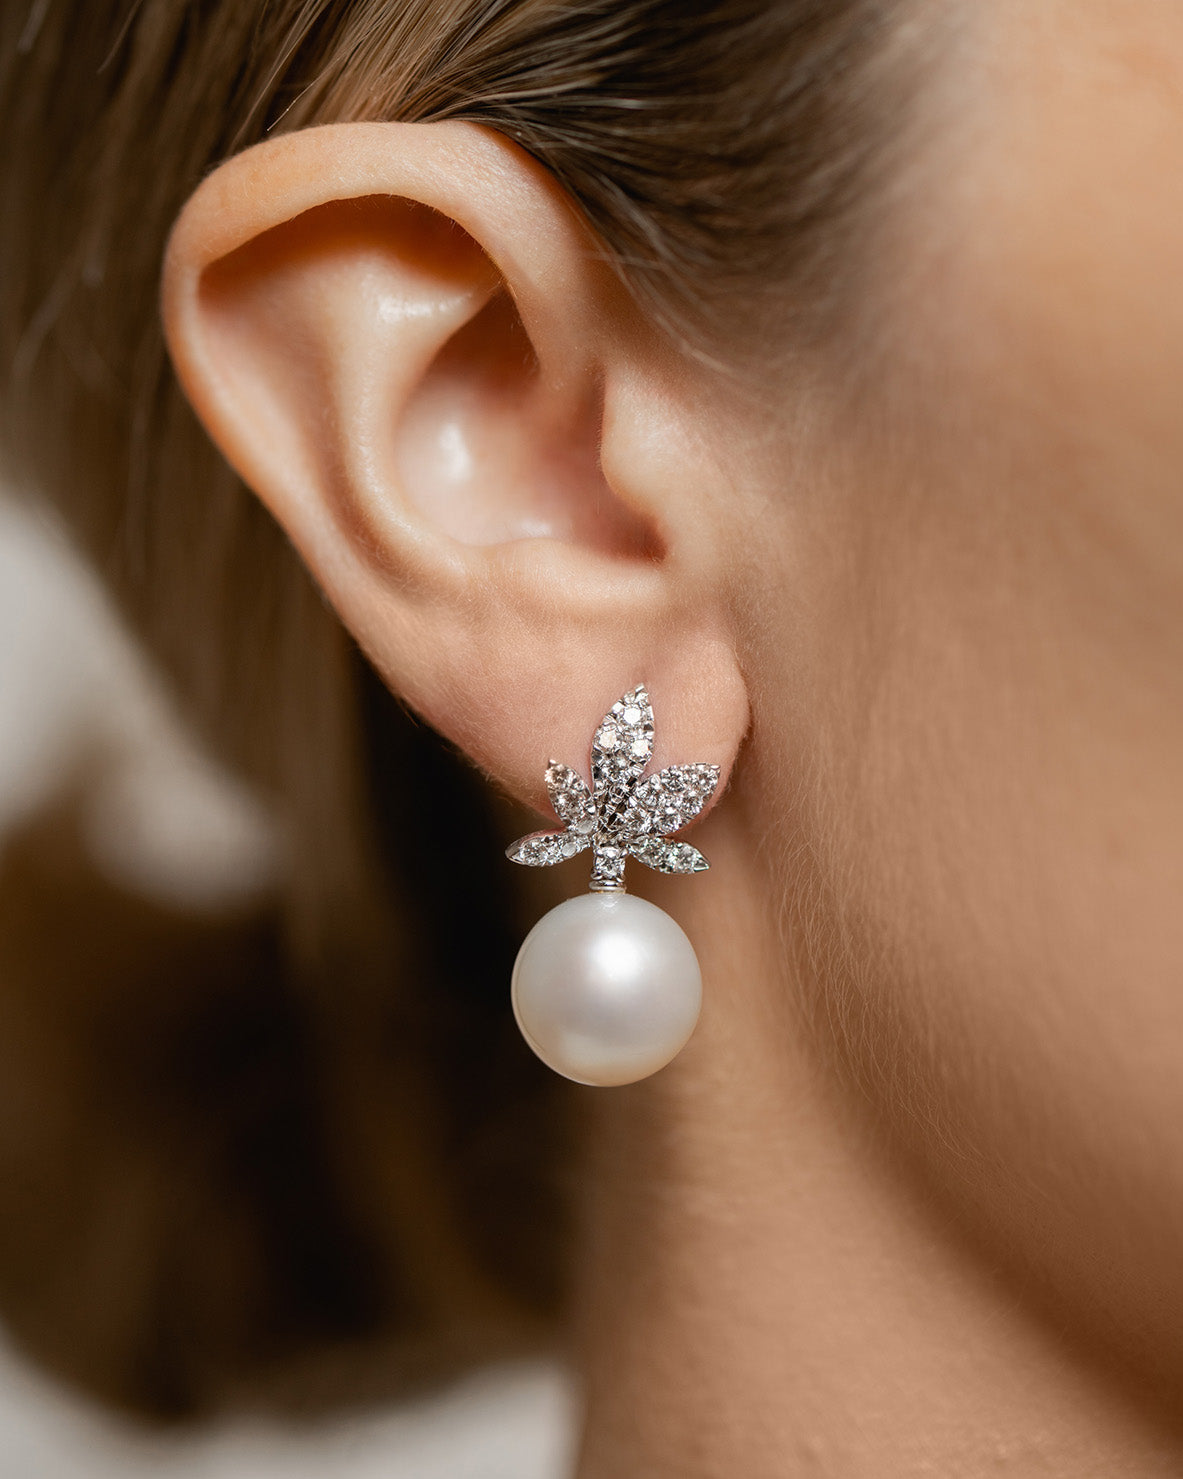 Paolo Piovan - Earrings Frosted Pearl